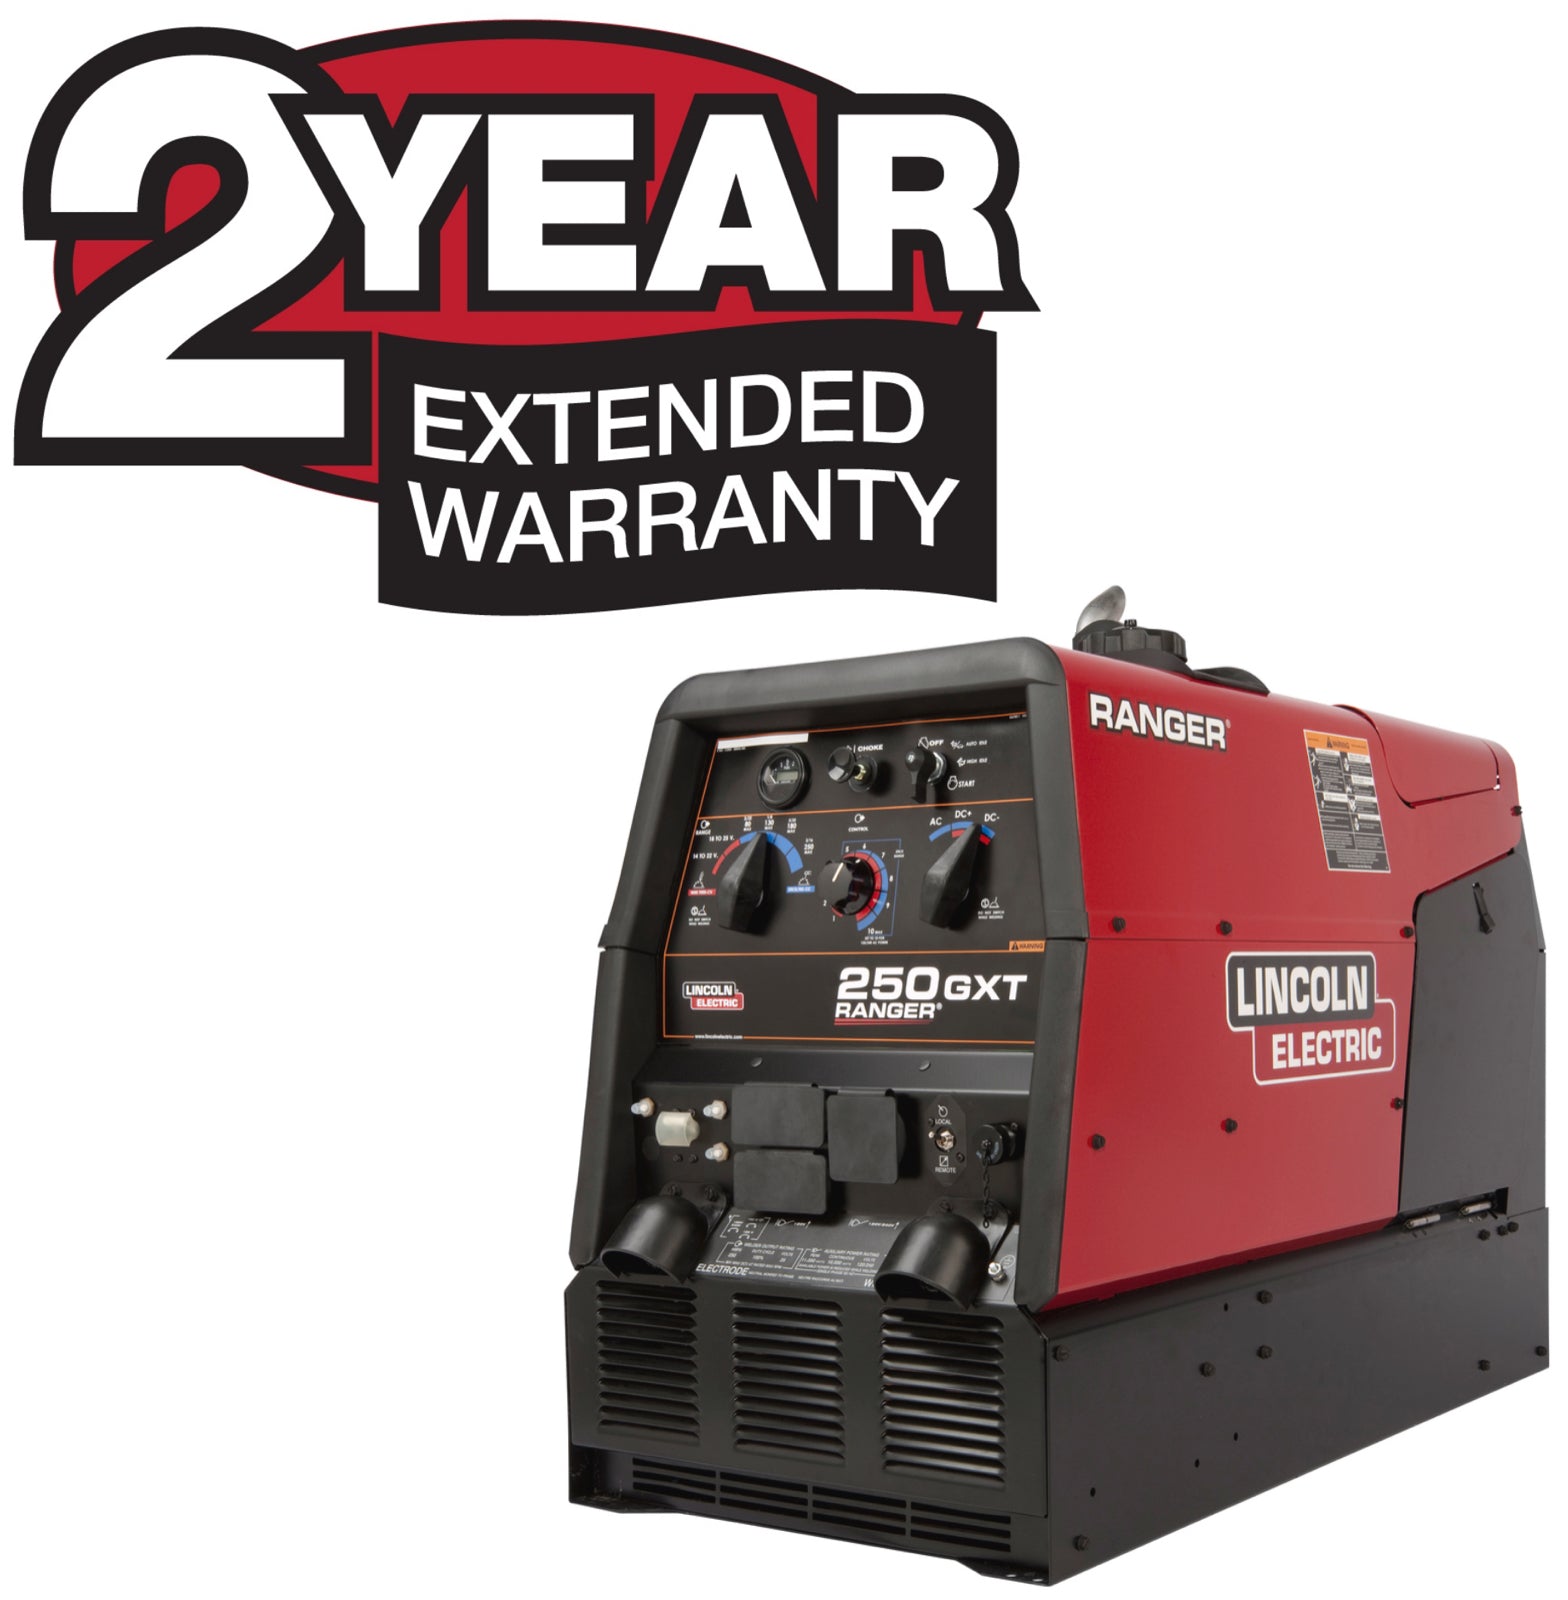 Lincoln 2-Year Extended Warranty - Ranger 250 GXT X2382